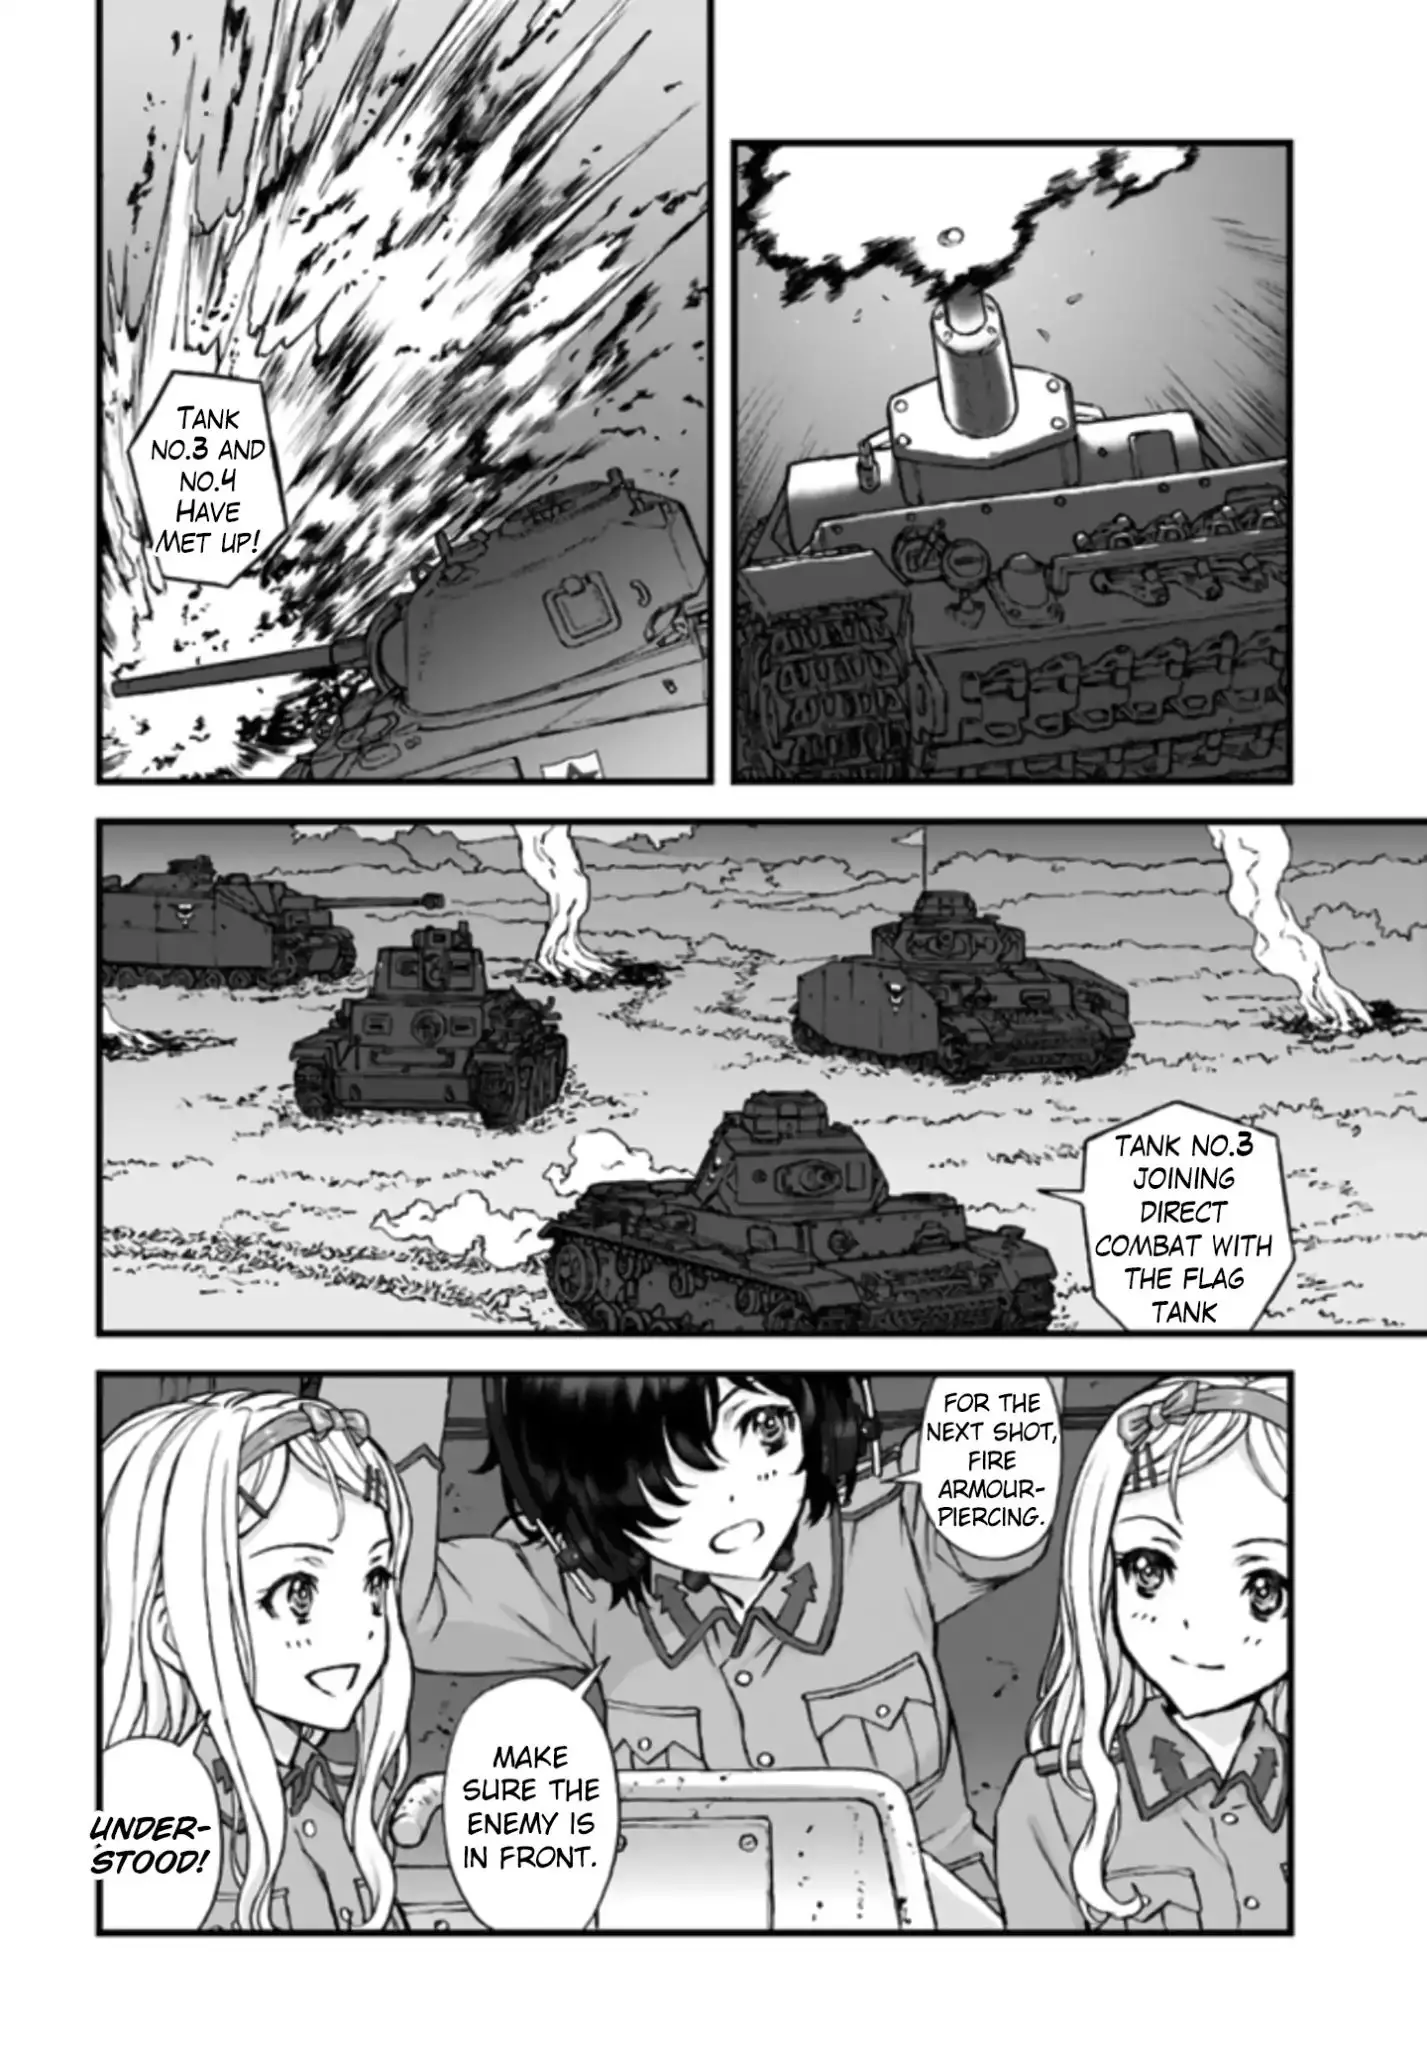 Girls Und Panzer - The Fir Tree And The Iron-Winged Witch - 3 page 5